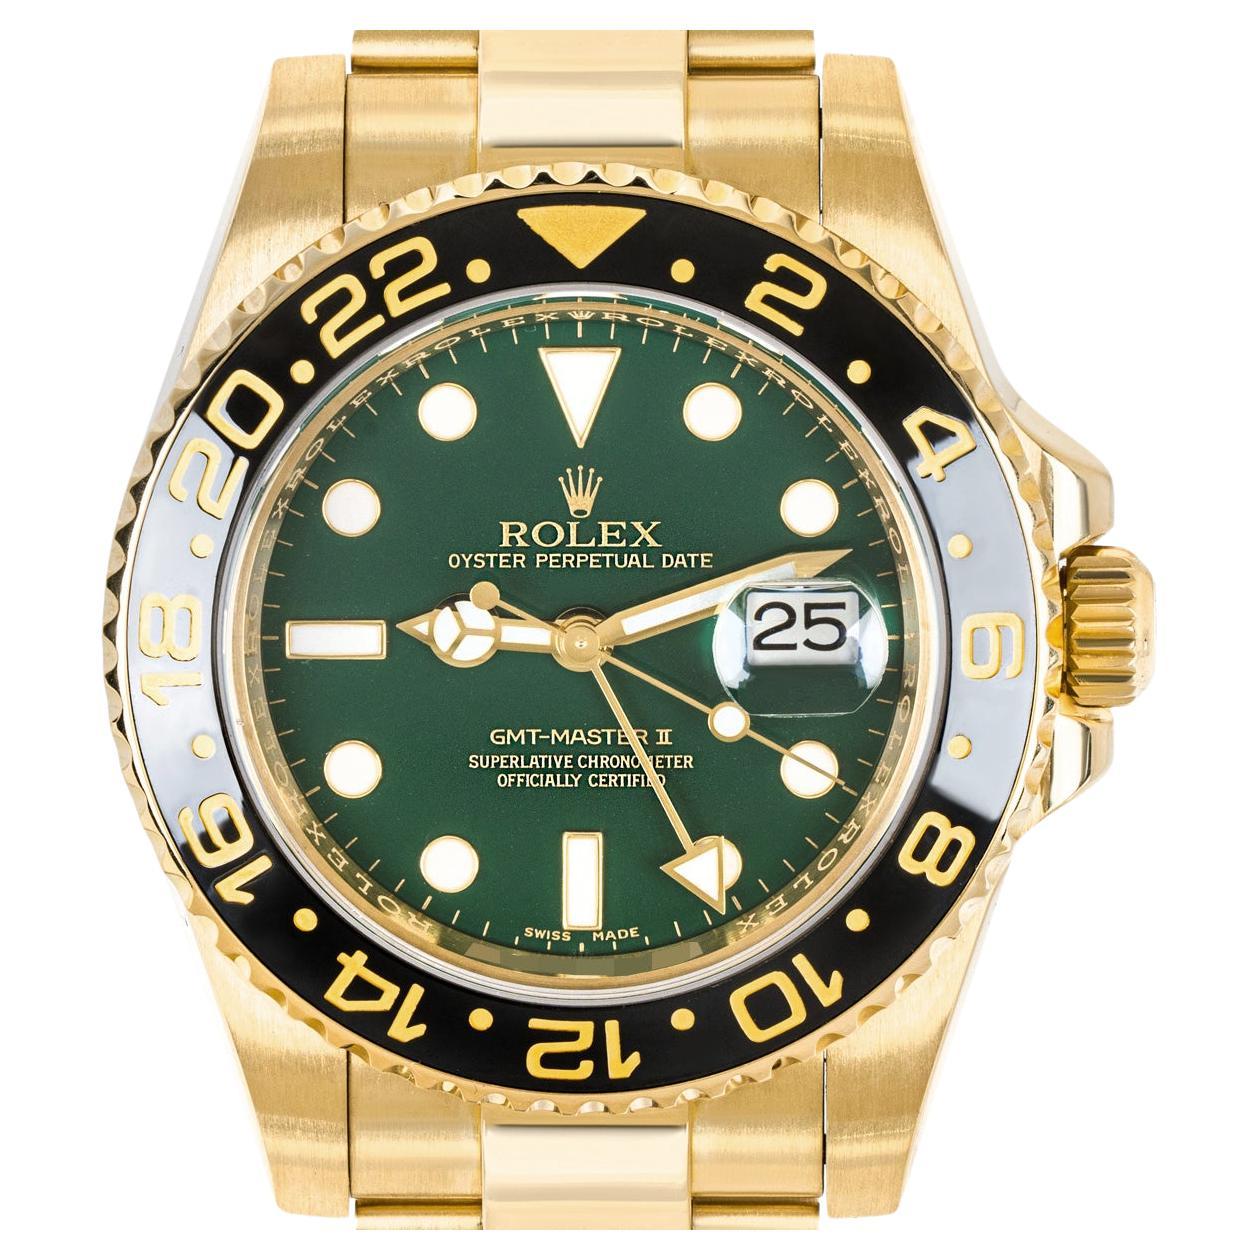 A men' s GMT-Master wristwatch, crafted from 18k yellow gold by Rolex. Featuring a distinctive green dial with gold applied hour markers and a date aperture at 3 o'clock. Complementing the dial is a yellow gold bi-directional rotatable bezel with a